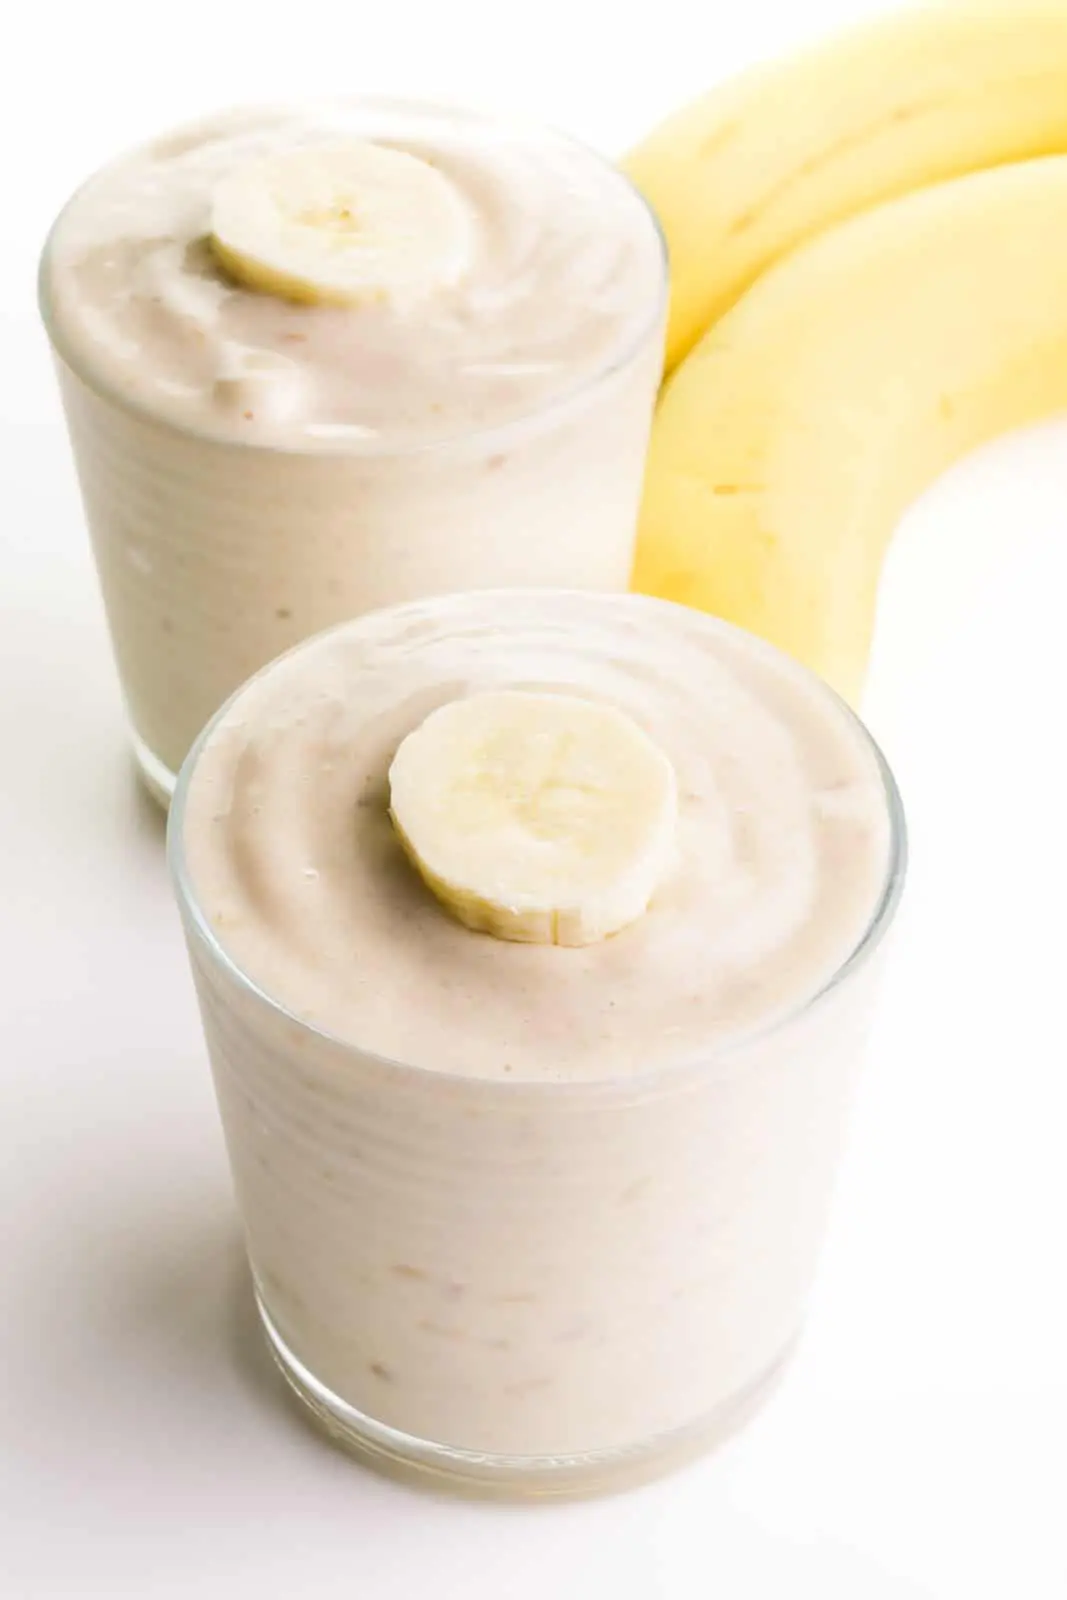 A banana milkshake is in a glass with a slice of banana on top. There's a second glass and some bananas in the background.